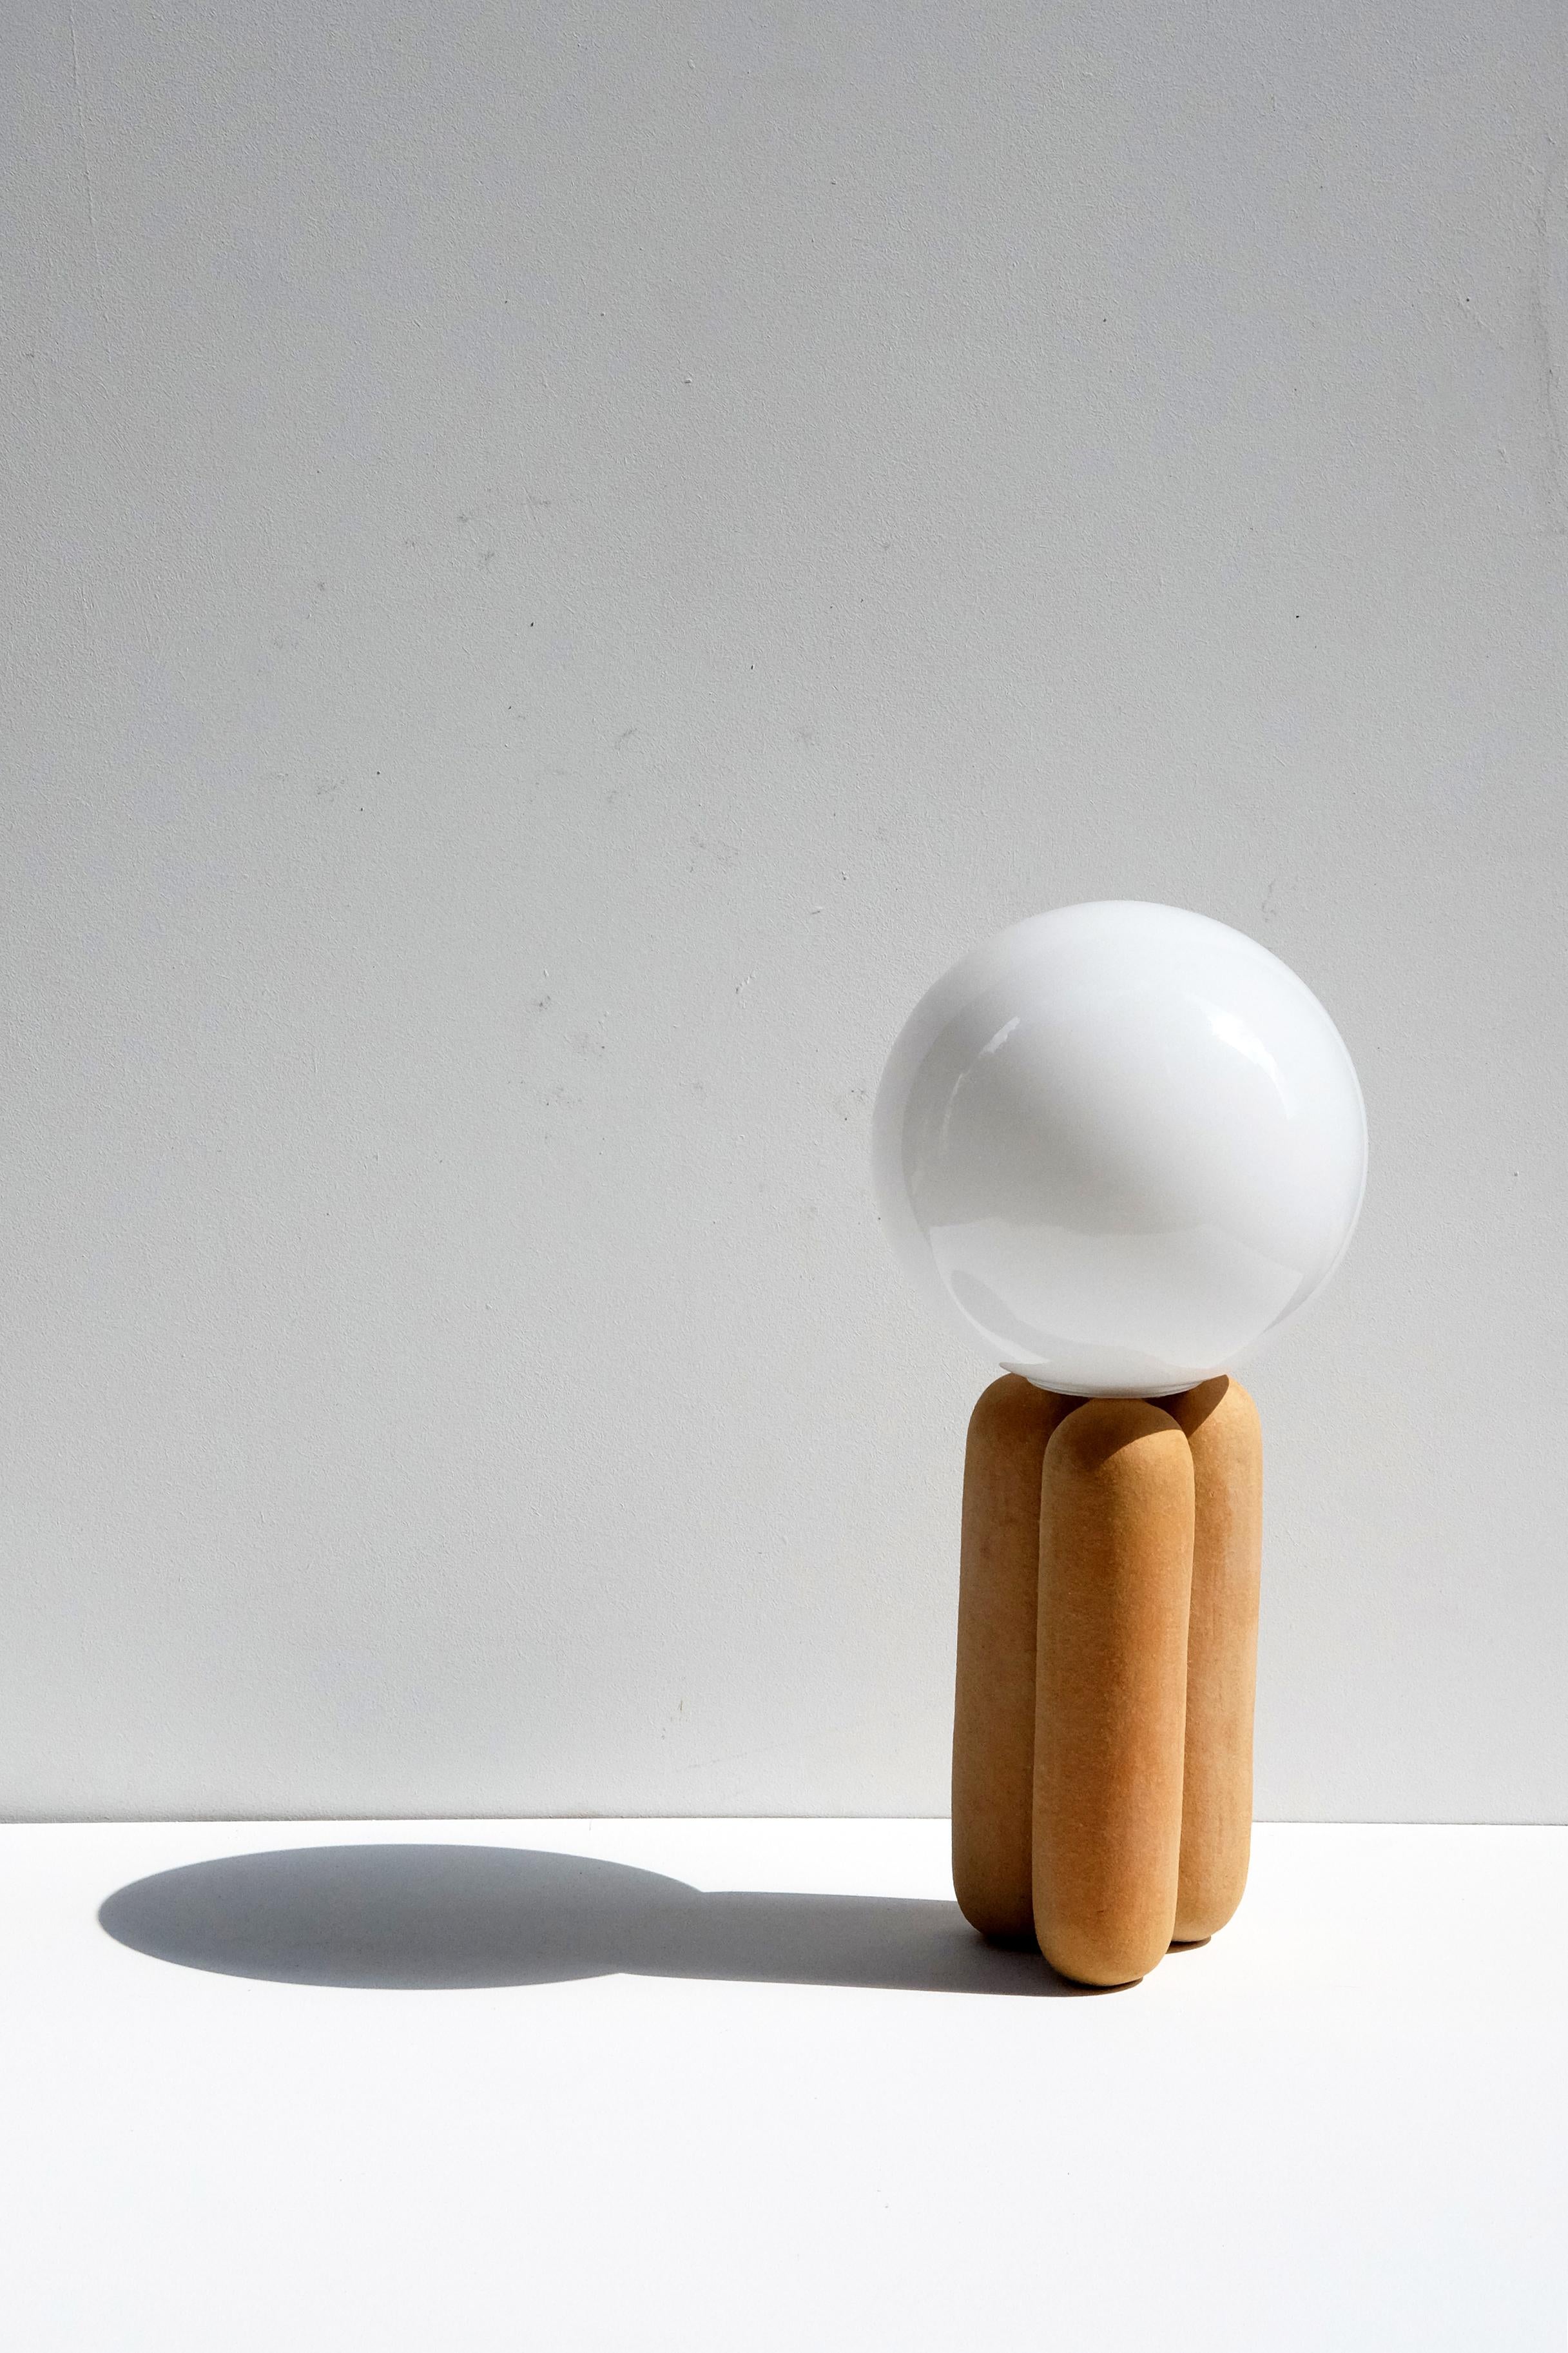 Clay Small Half Sphere Lamp by Lisa Allegra For Sale